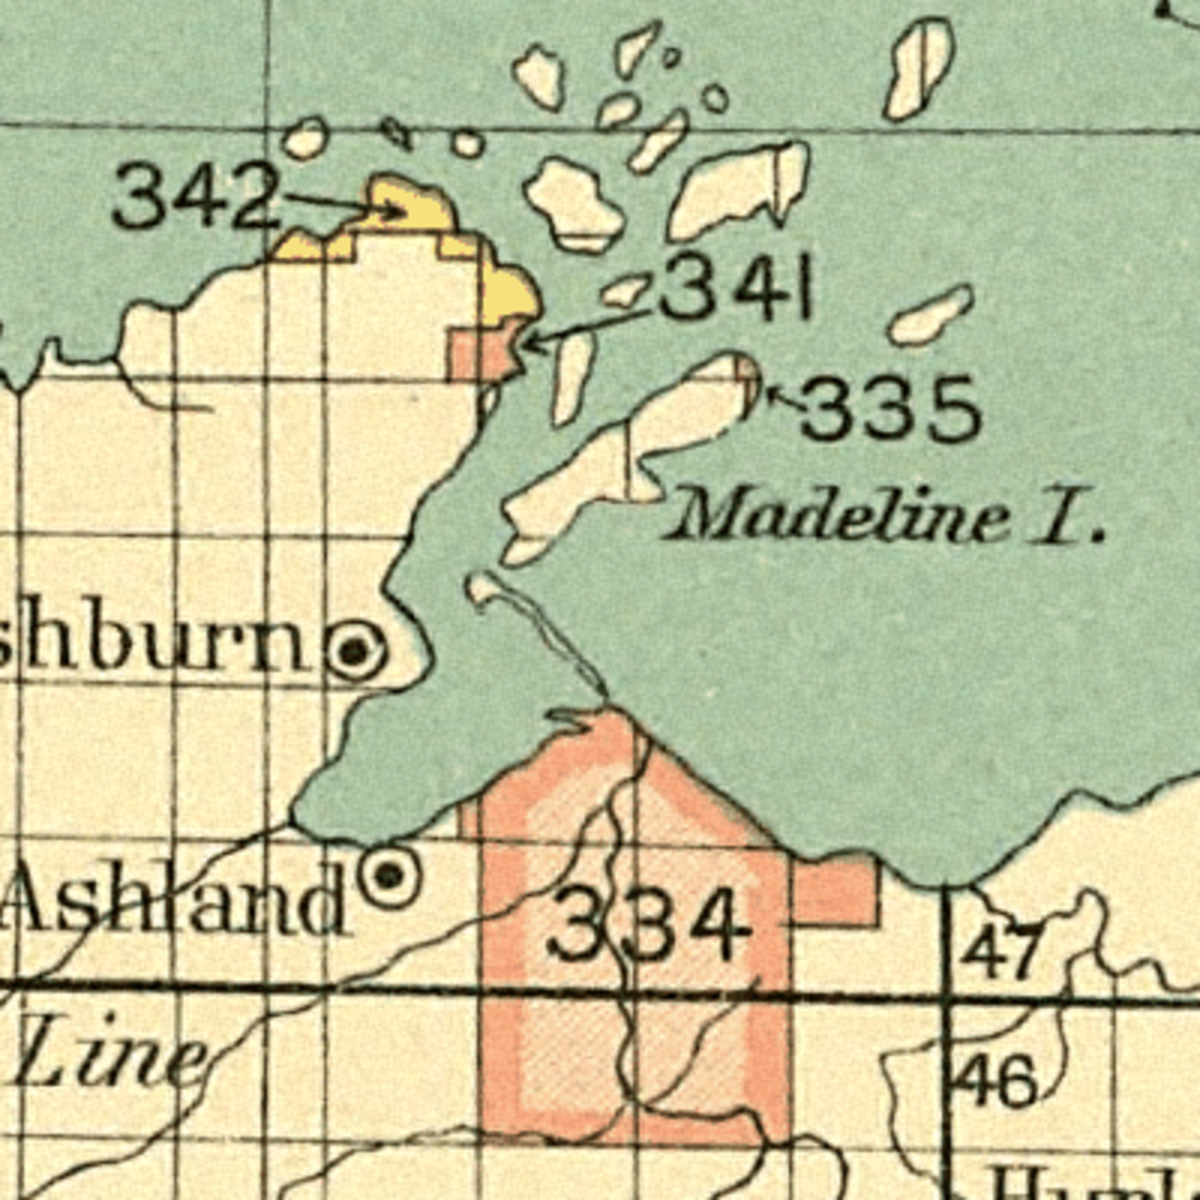 1899 map of Chippewa reservations, Red Cliff is shown as #342